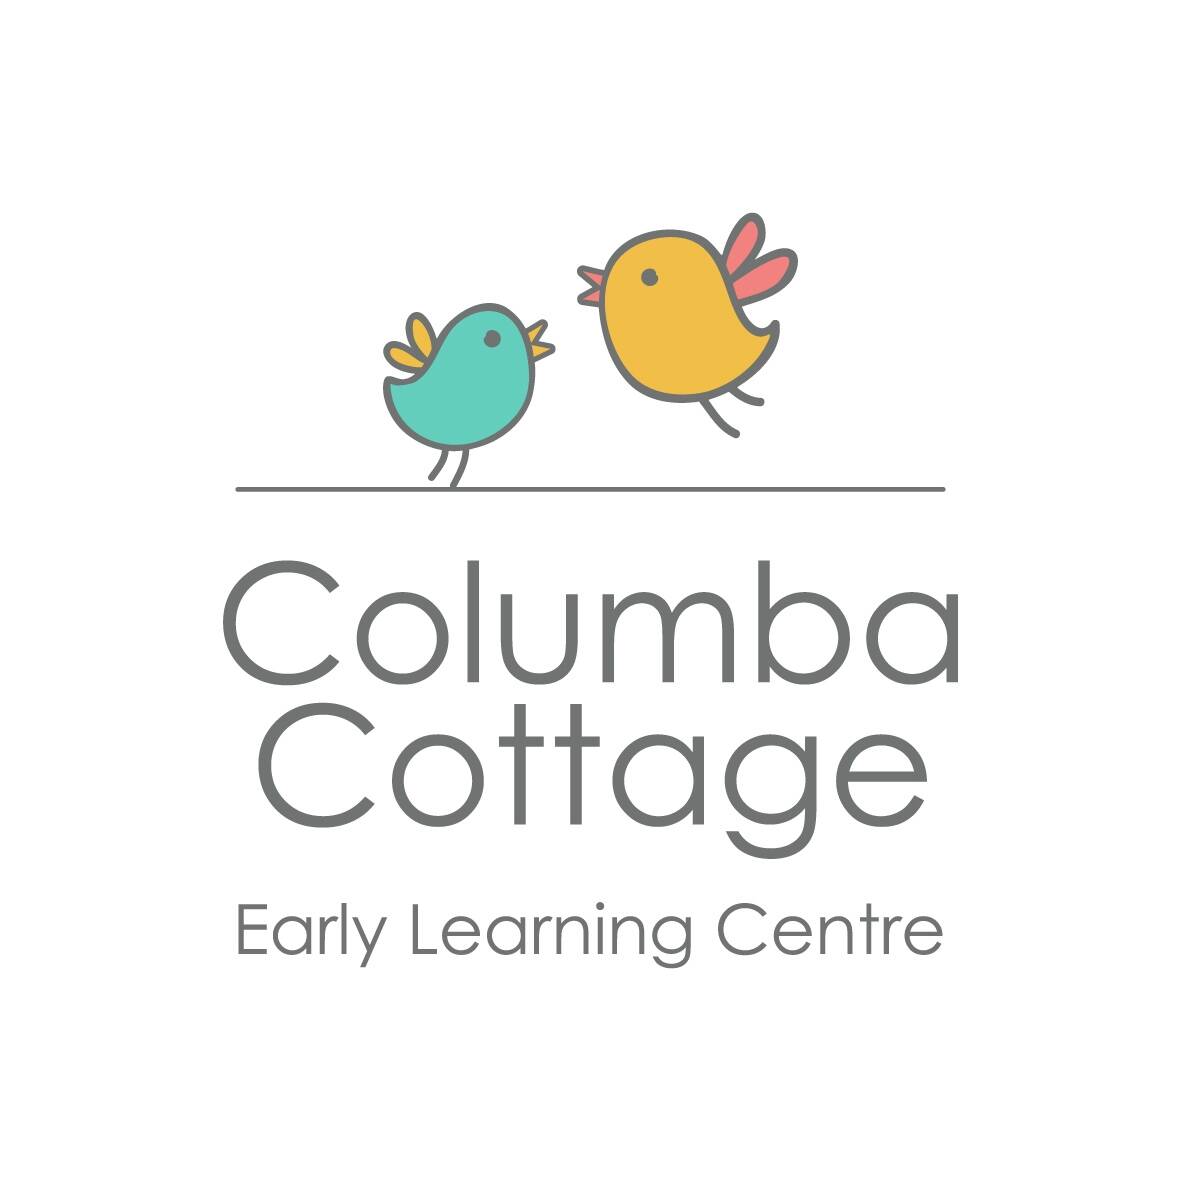 Columba Cottage Early Learning Centre